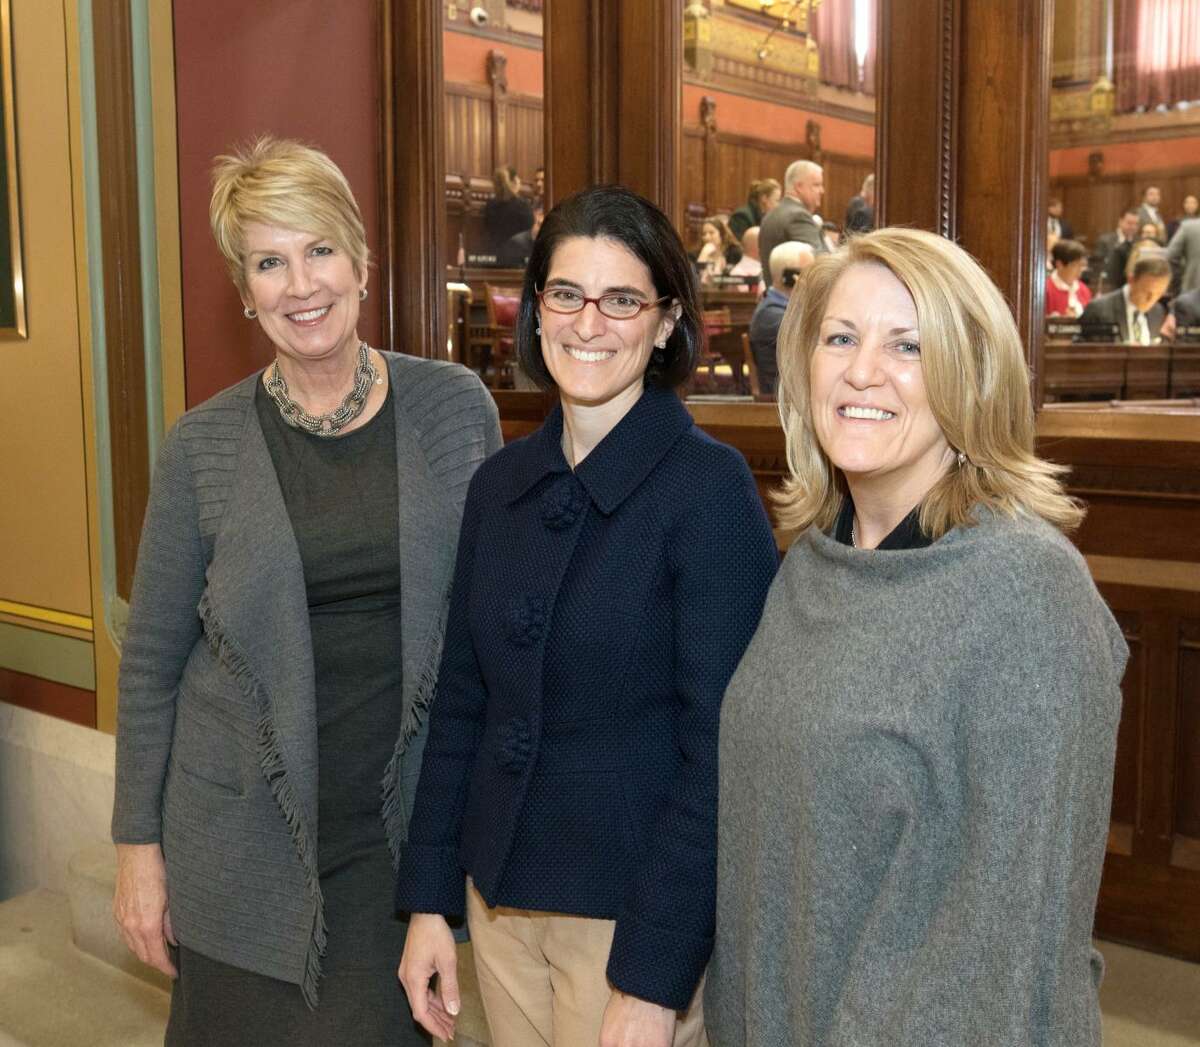 State Reps. Laura Devlin, R-134, Cristin McCarthy Vahey, D-133, and Brenda Kupchick, D-132, have joined the legislature?’s newly formed bi-partisan Fire and EMS Caucus.